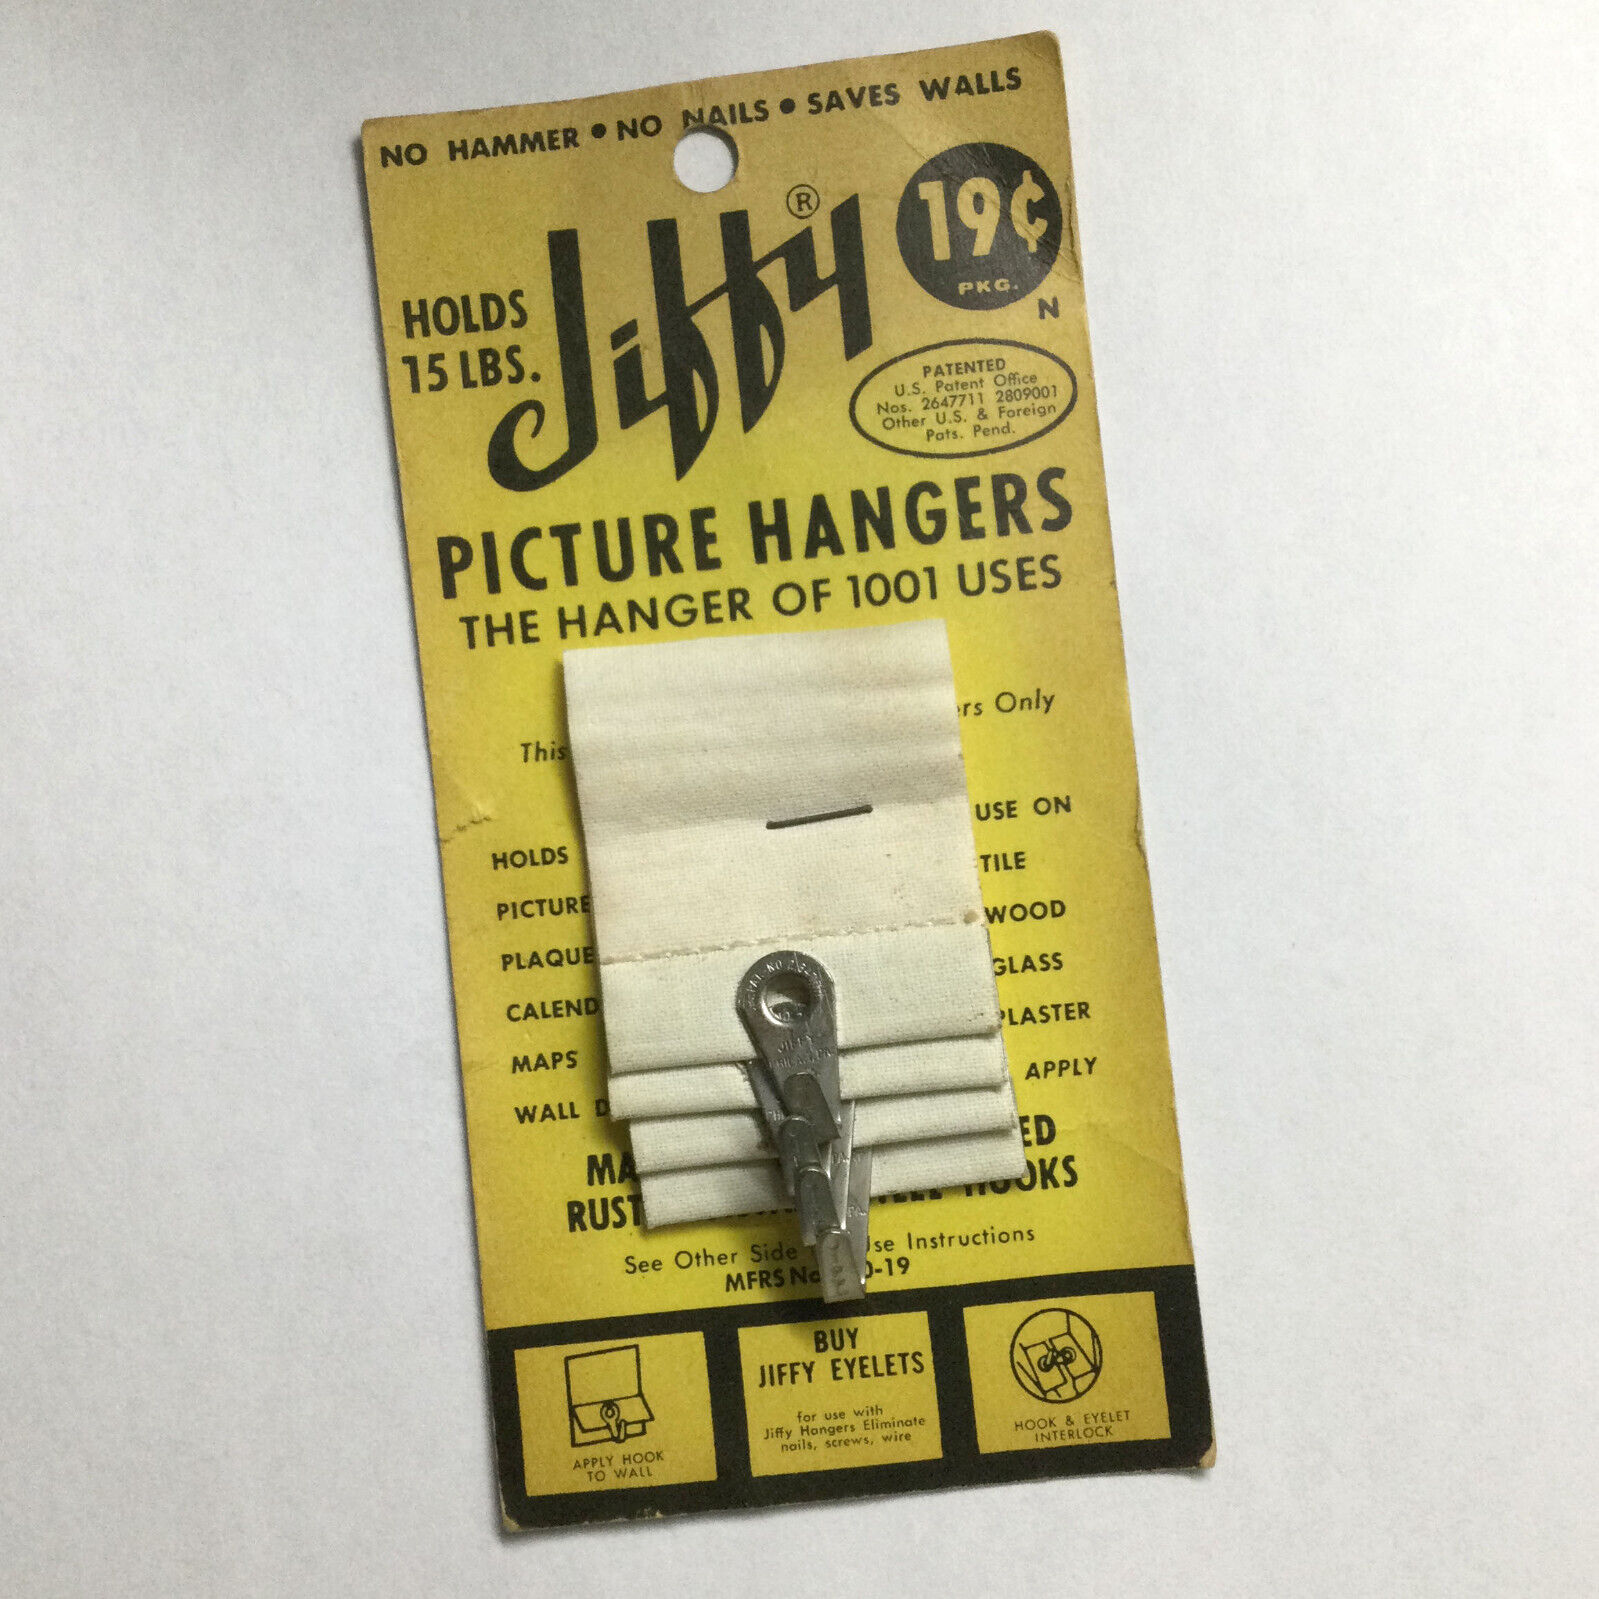 1962 Jiffy Picture Hangers. Retail Yellow And Black. Great Retro Type. 19¢ For 4